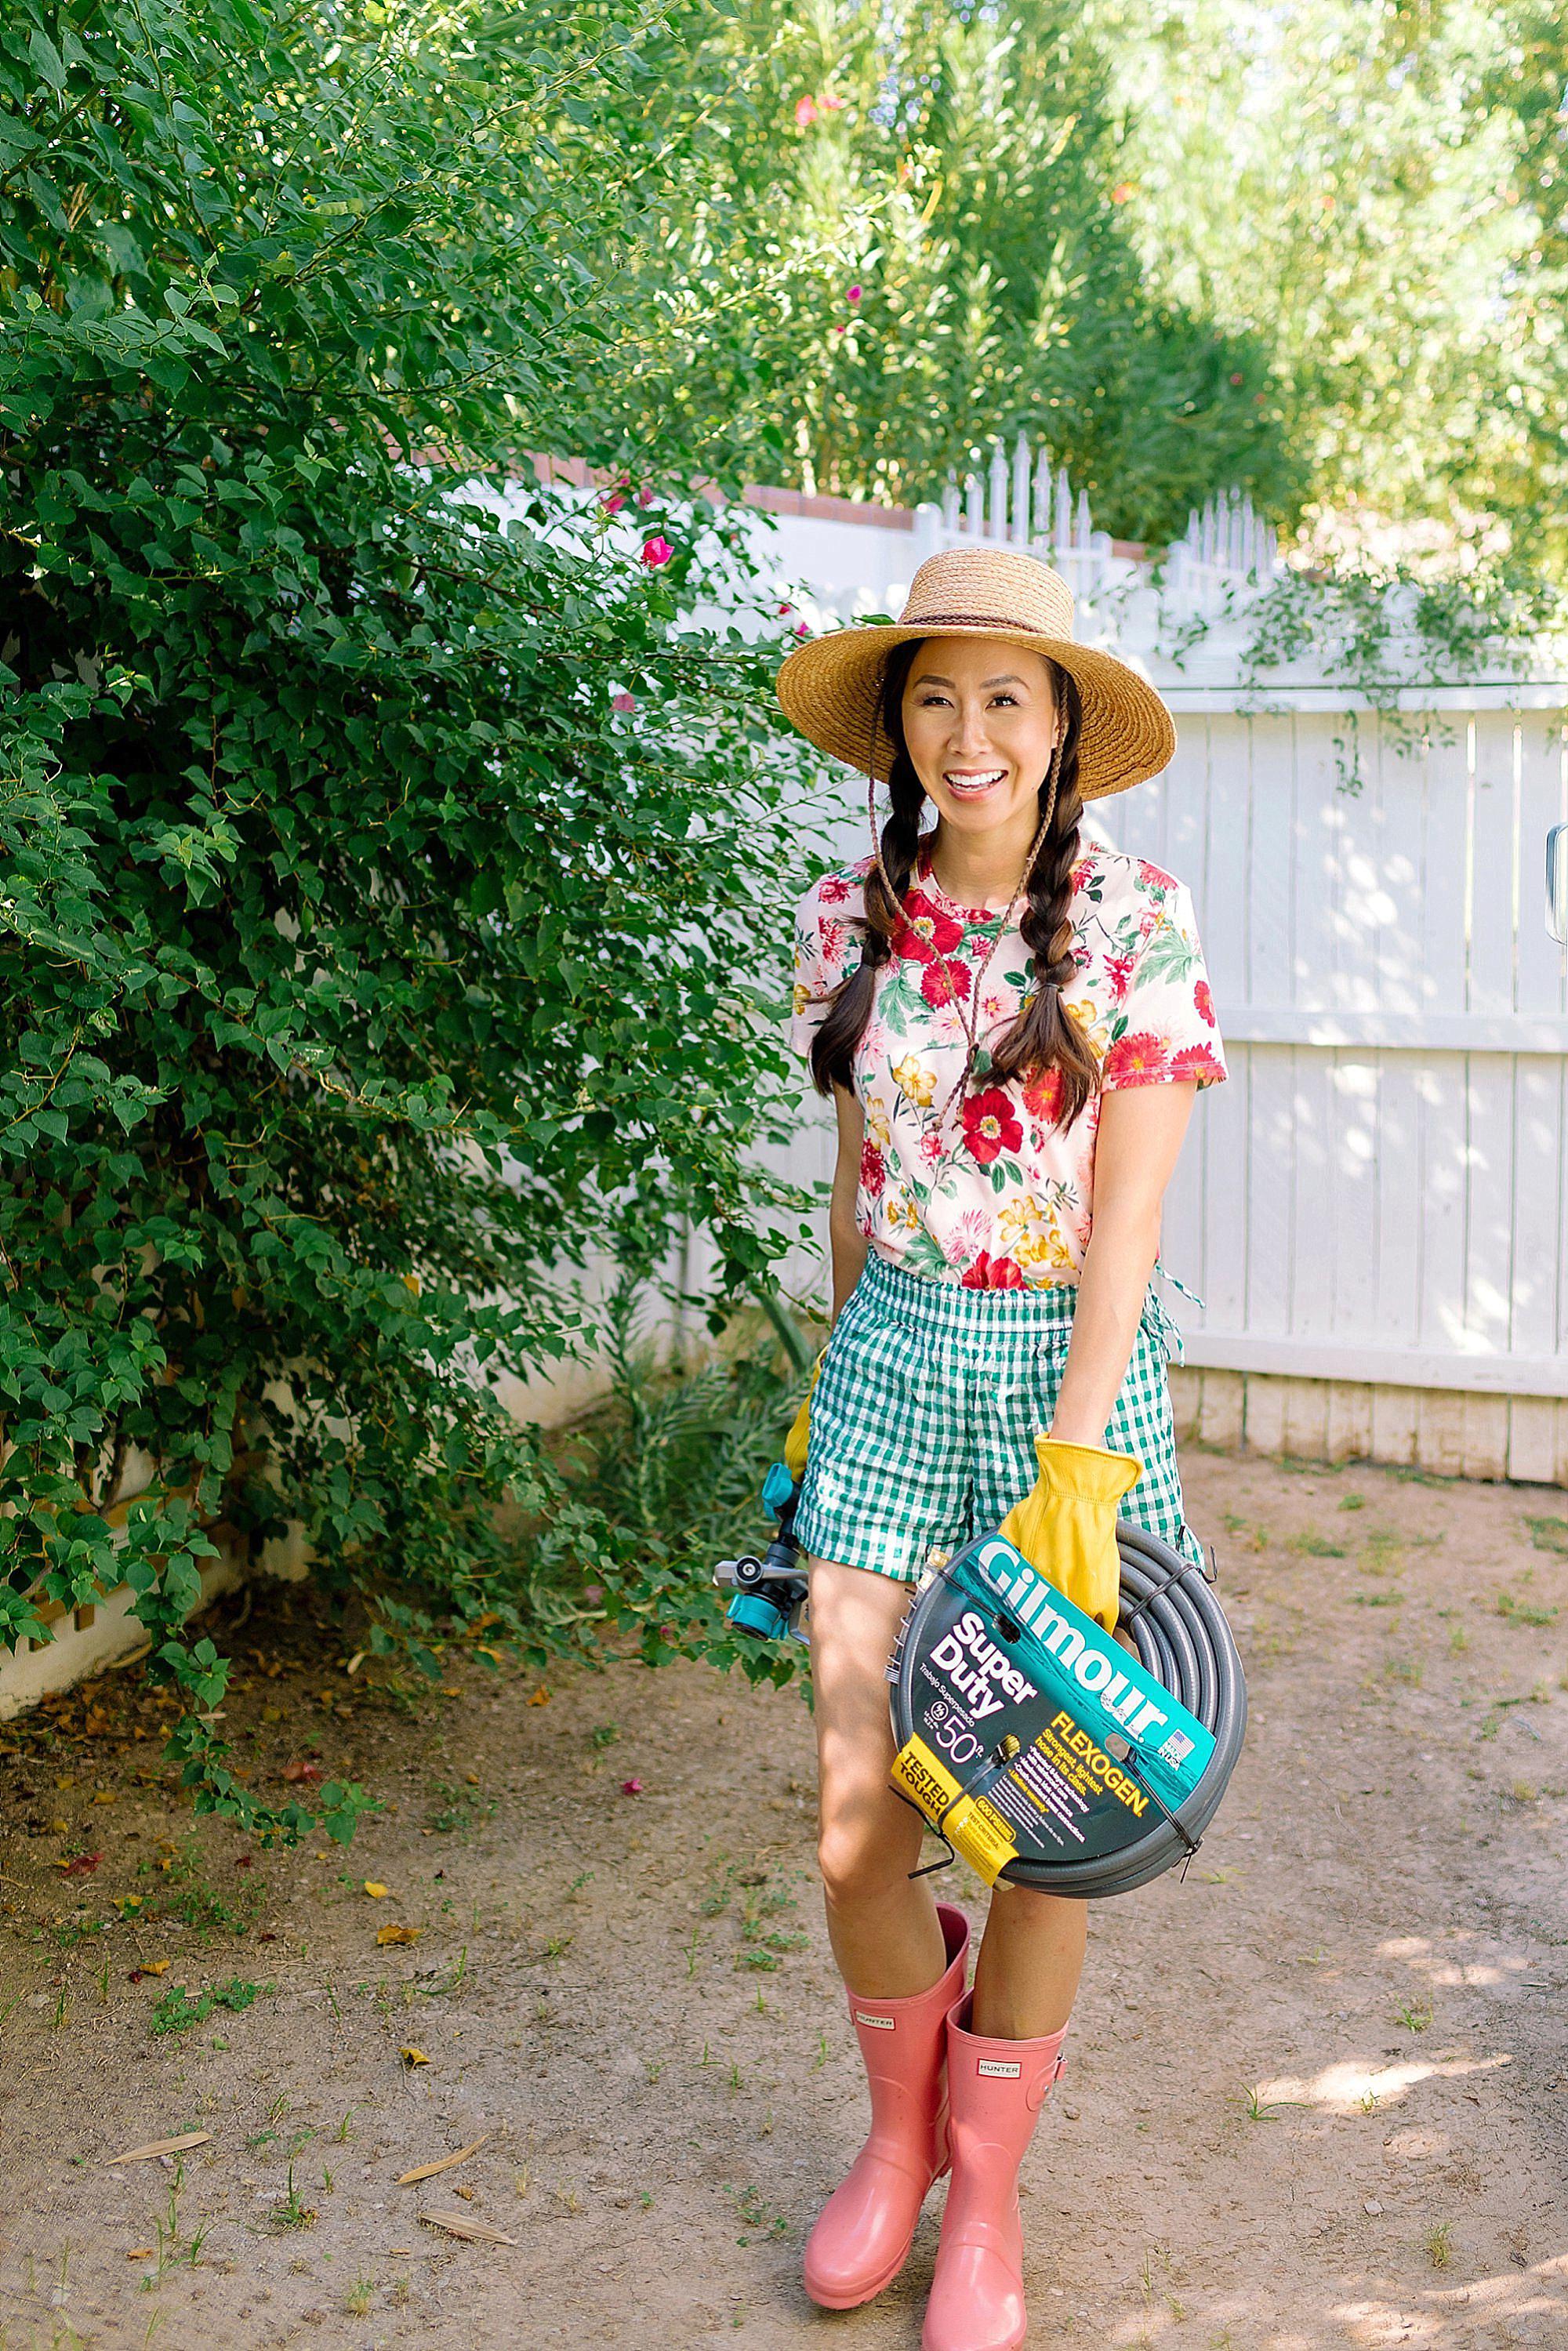 FAQ on our backyard and gardening on the blog roundup post. lifestyle garden blogger Diana Elizabeth from phoenix arizona wearing floral top and gingham shorts